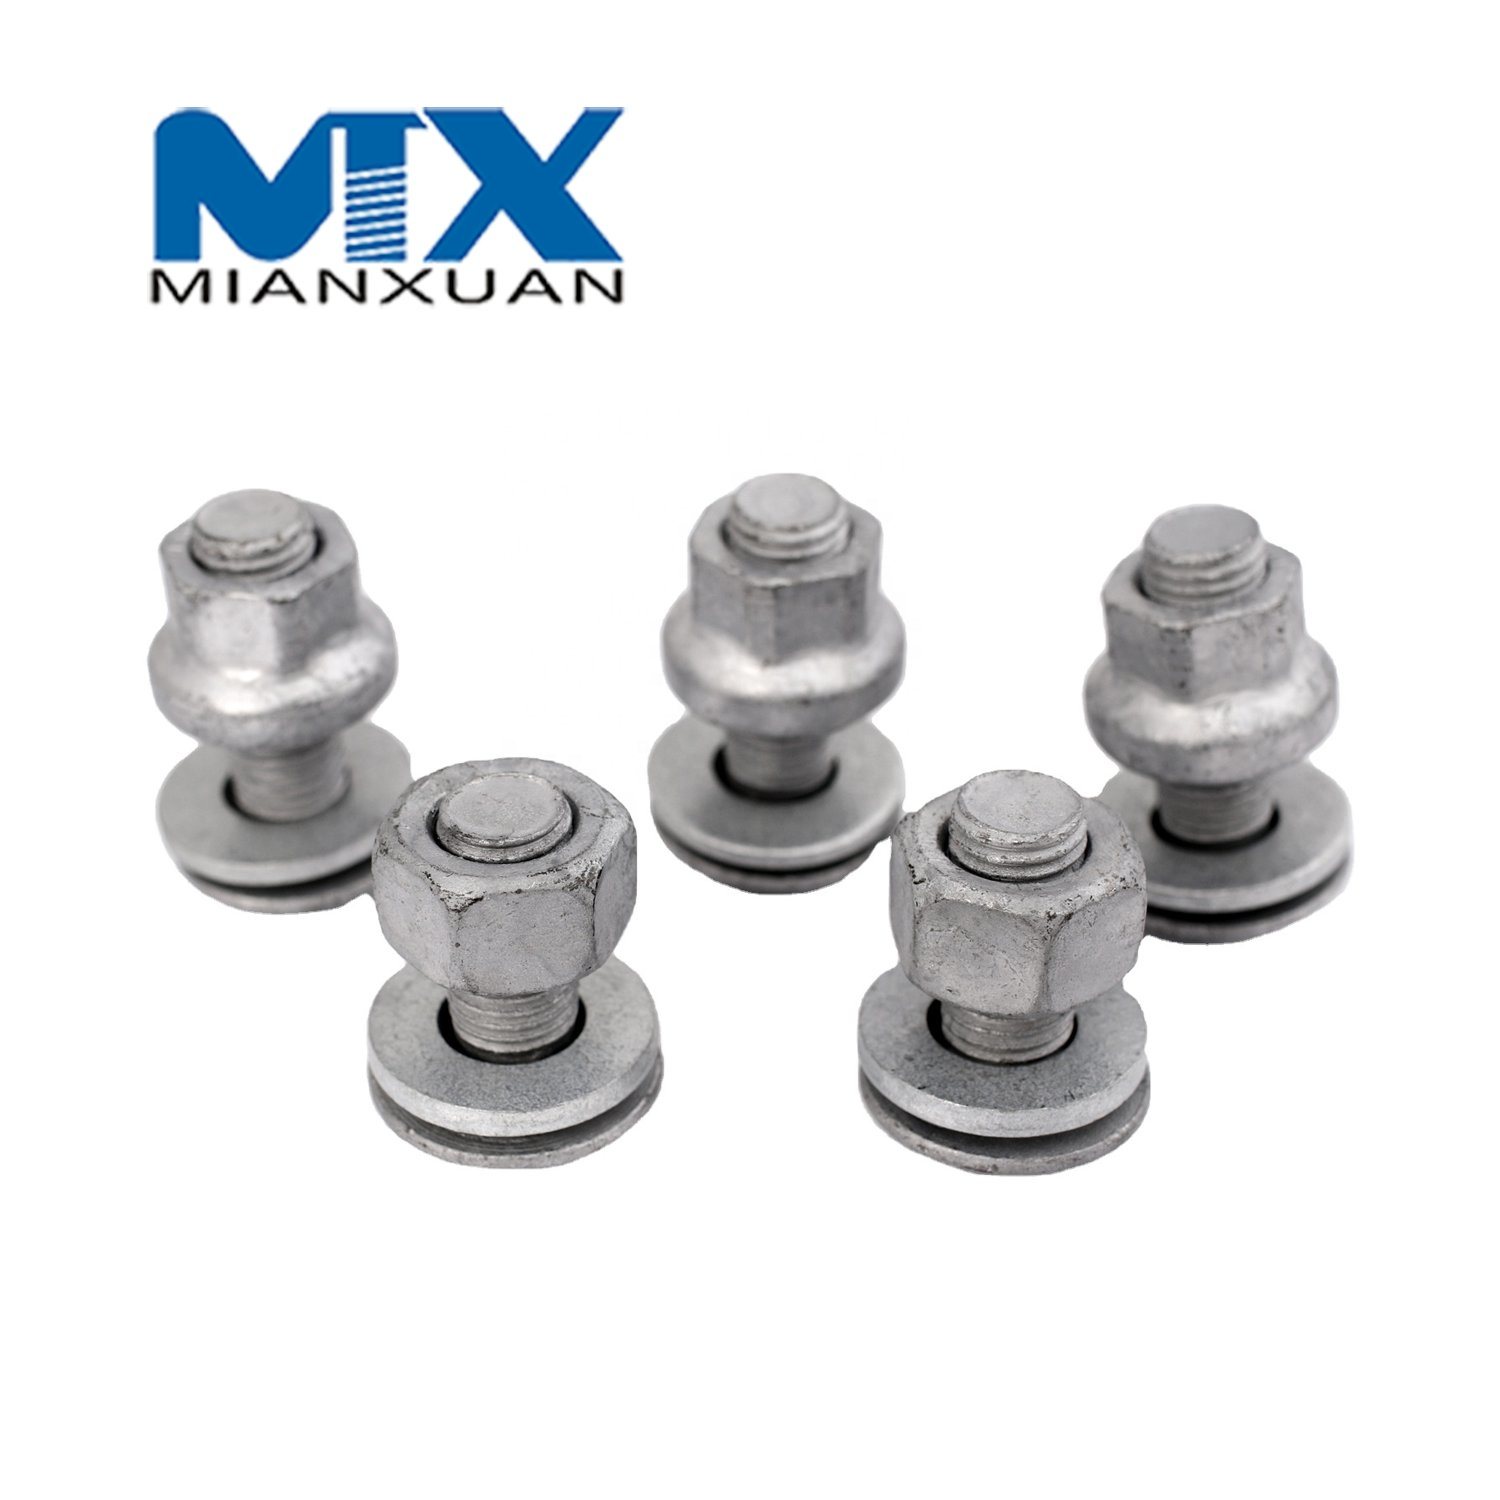 Factory Grade 8.8 Hot DIP Galvanized Highway Guardrail Bolts and Nuts